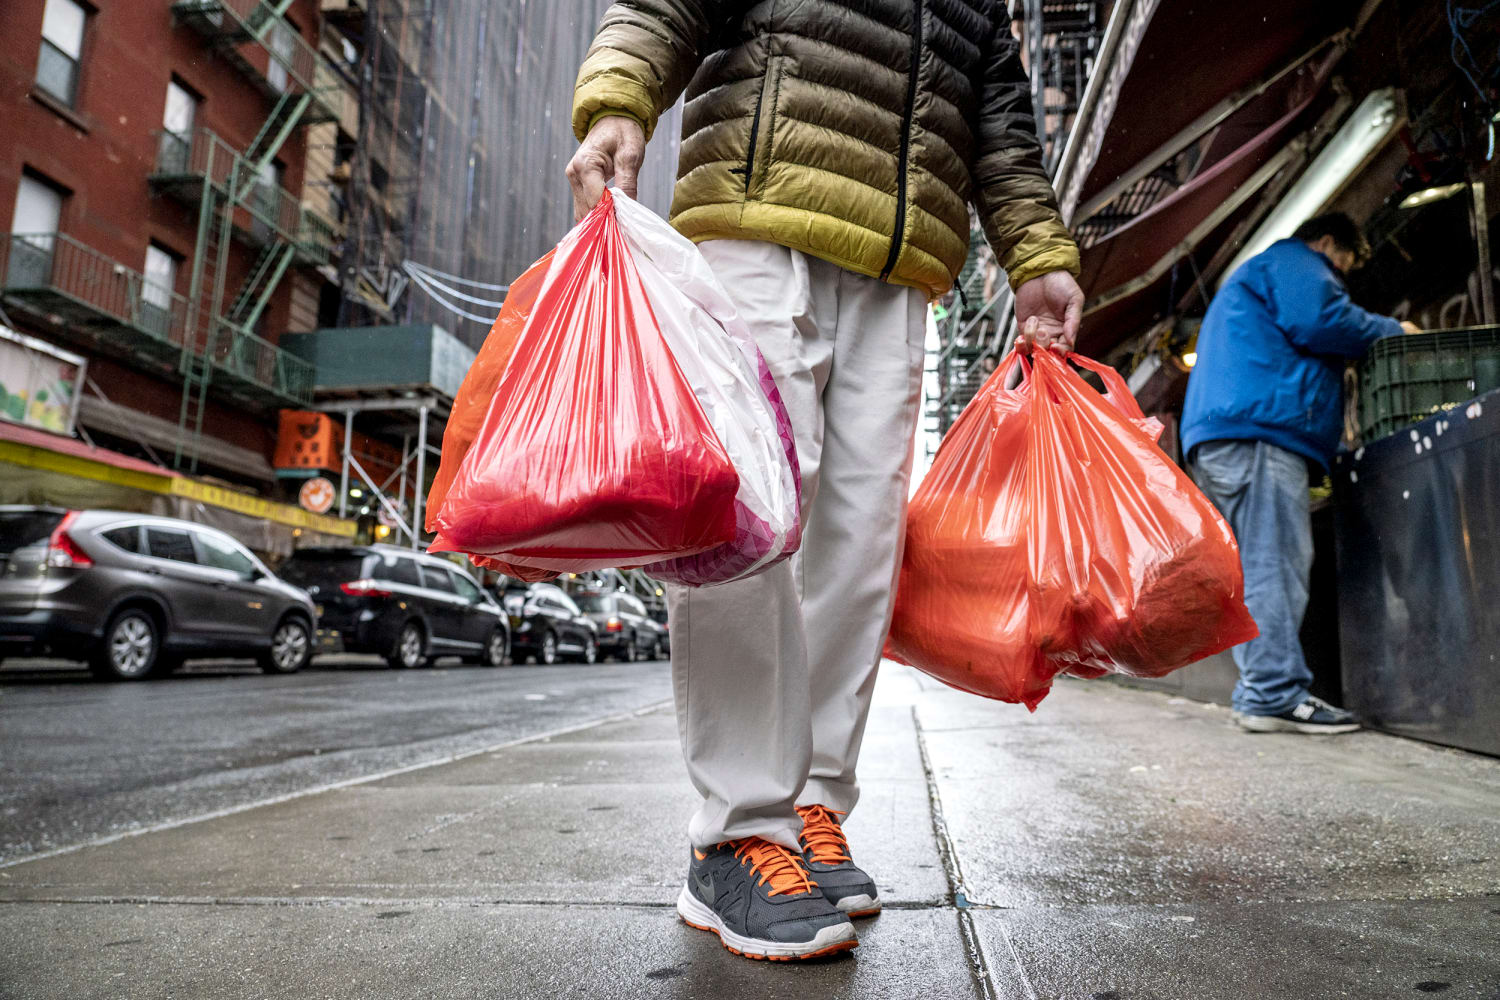 Plastic bags feel integral to modern life. But they're a relatively new  addition we could live without.